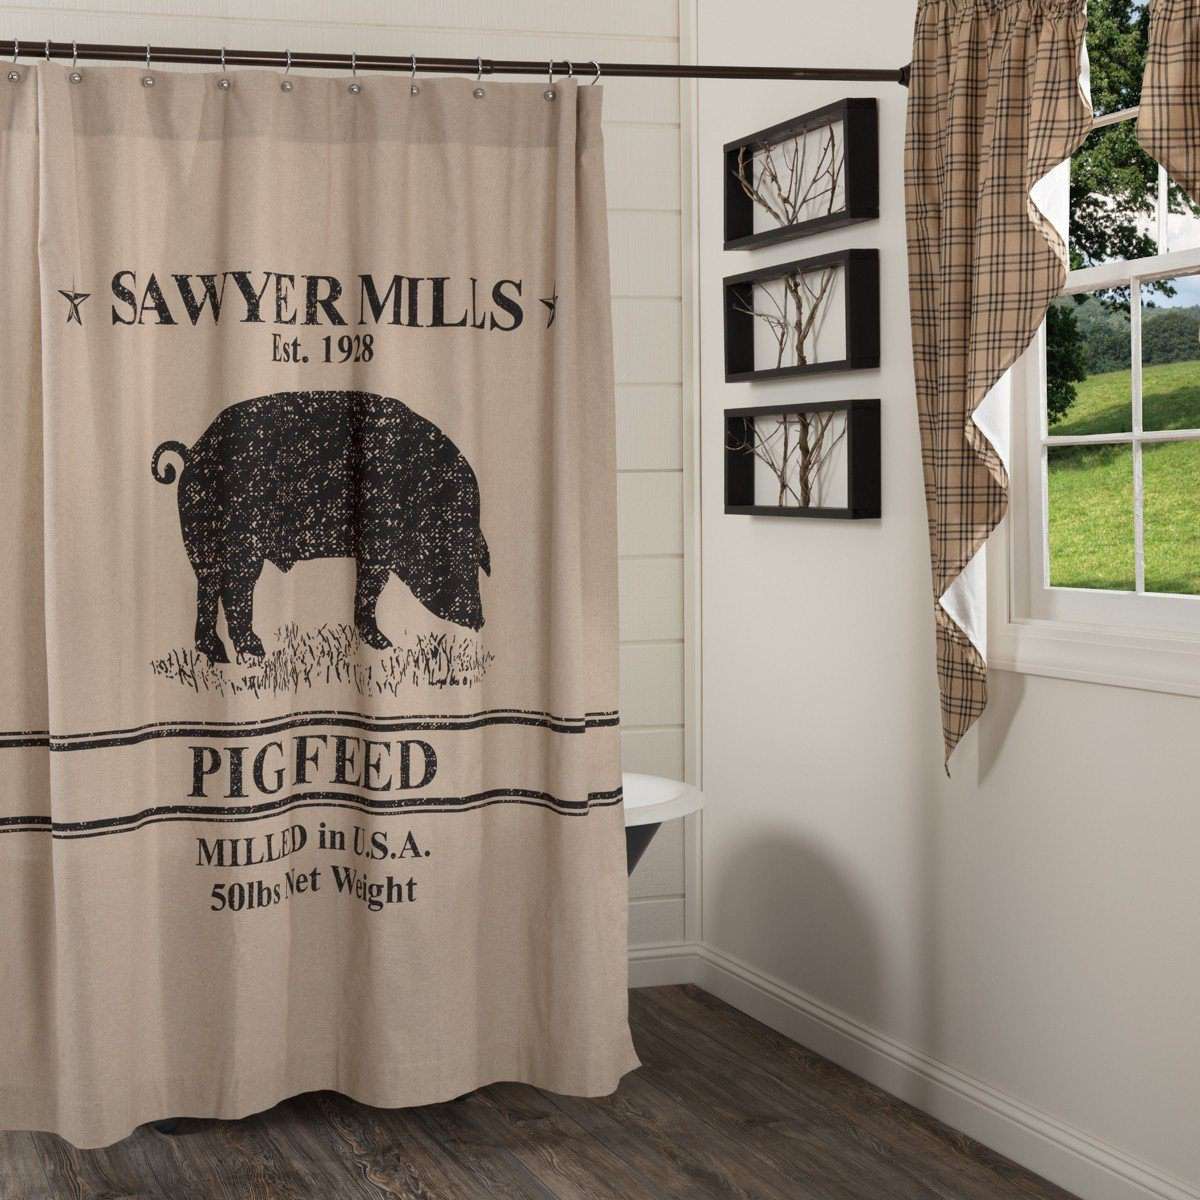 Sawyer Mill Charcoal Pig Shower Curtain 72"x72" curtain VHC Brands 